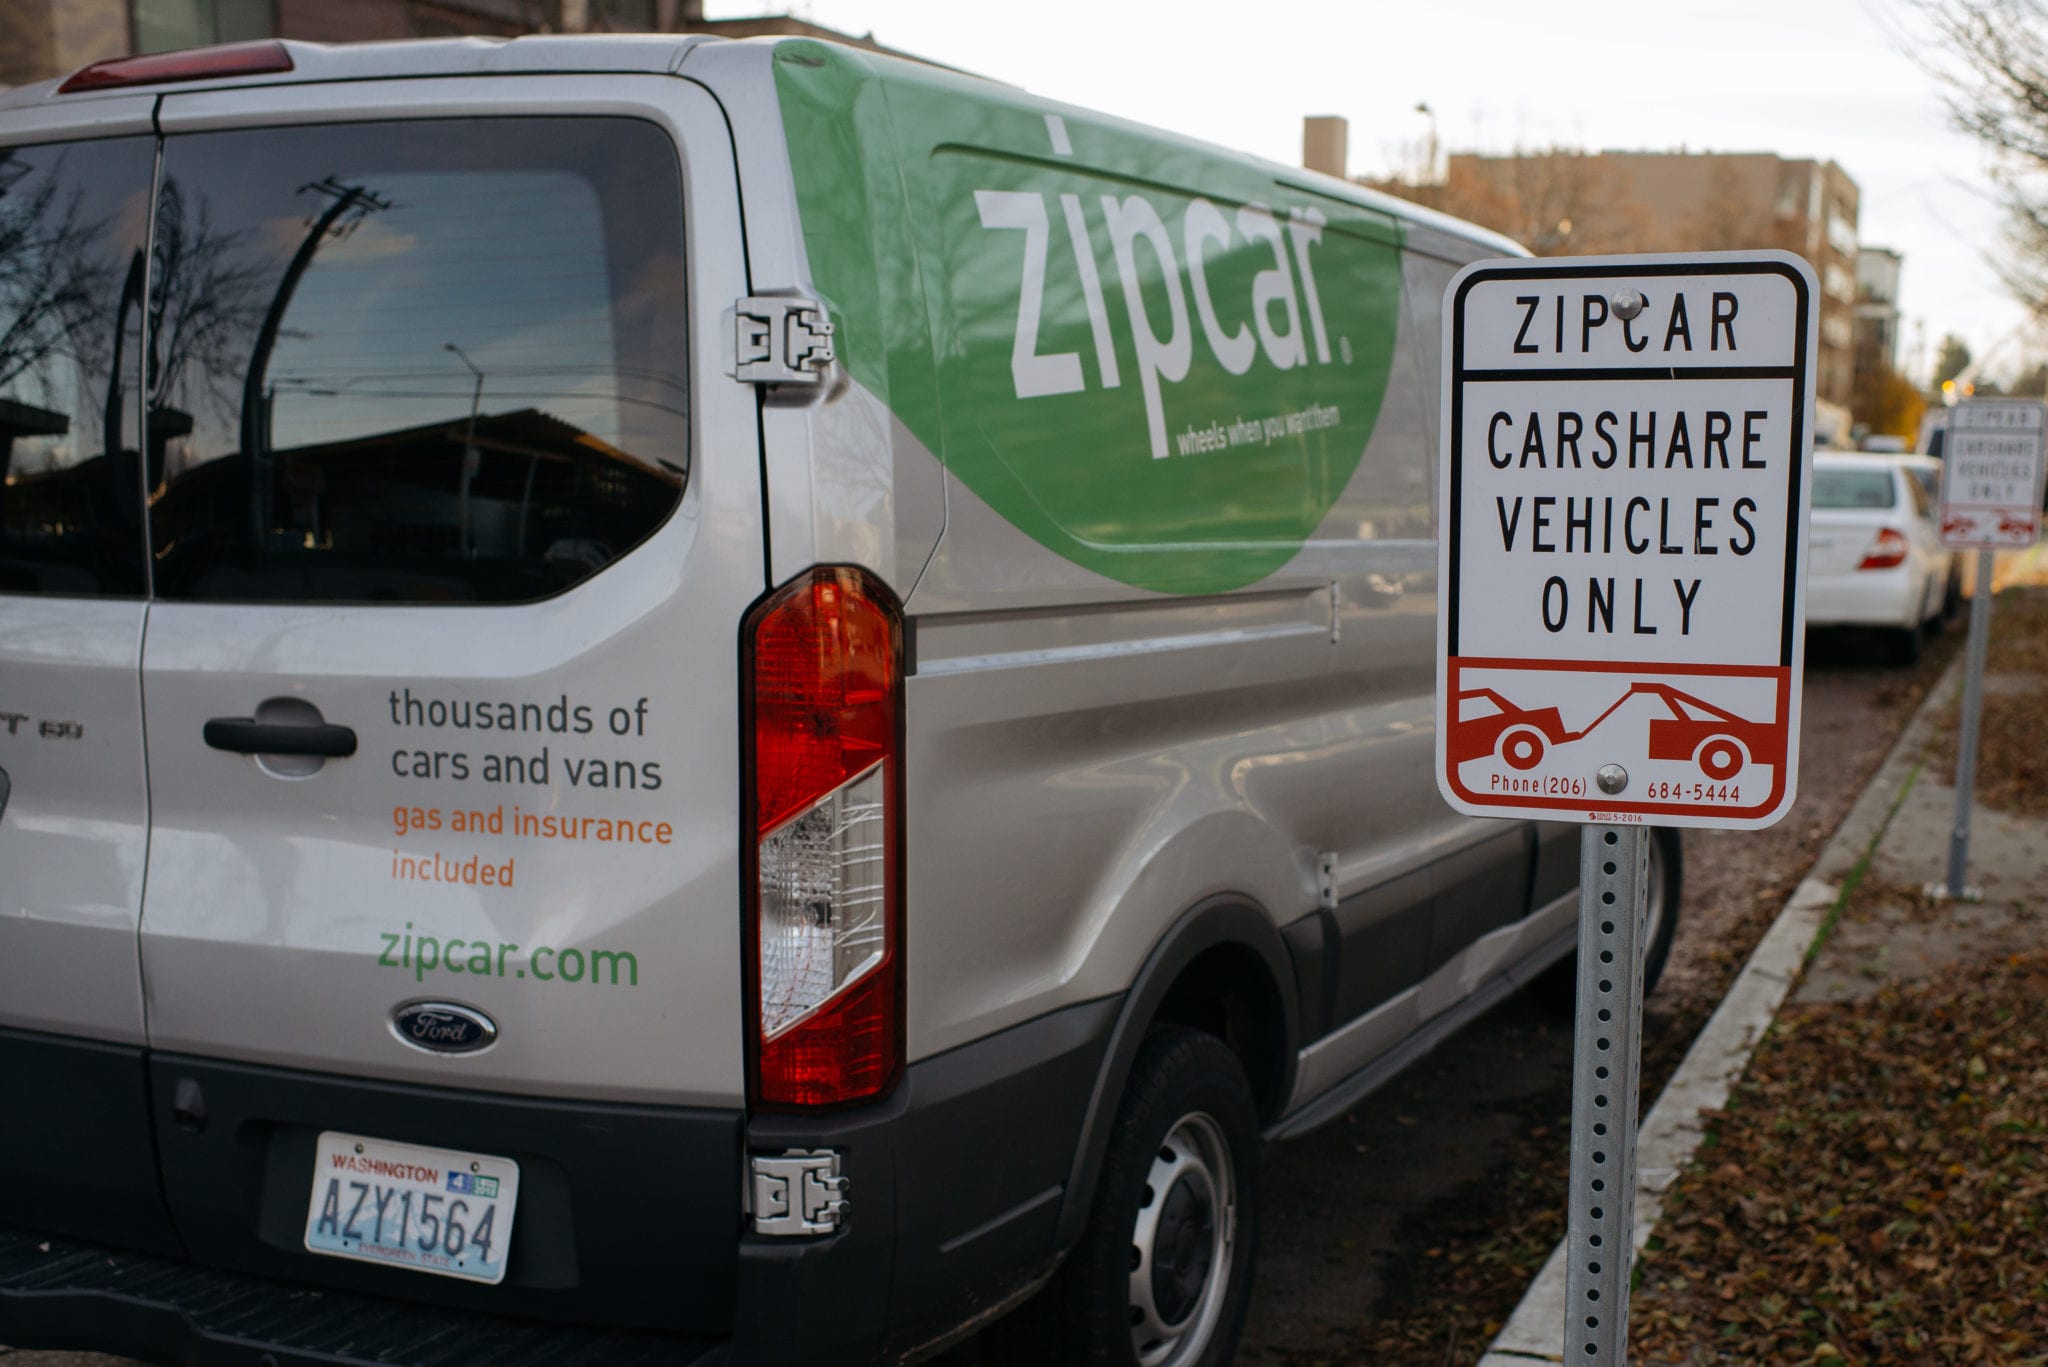 A Zipcar van parked near a car share vehicle only sign.